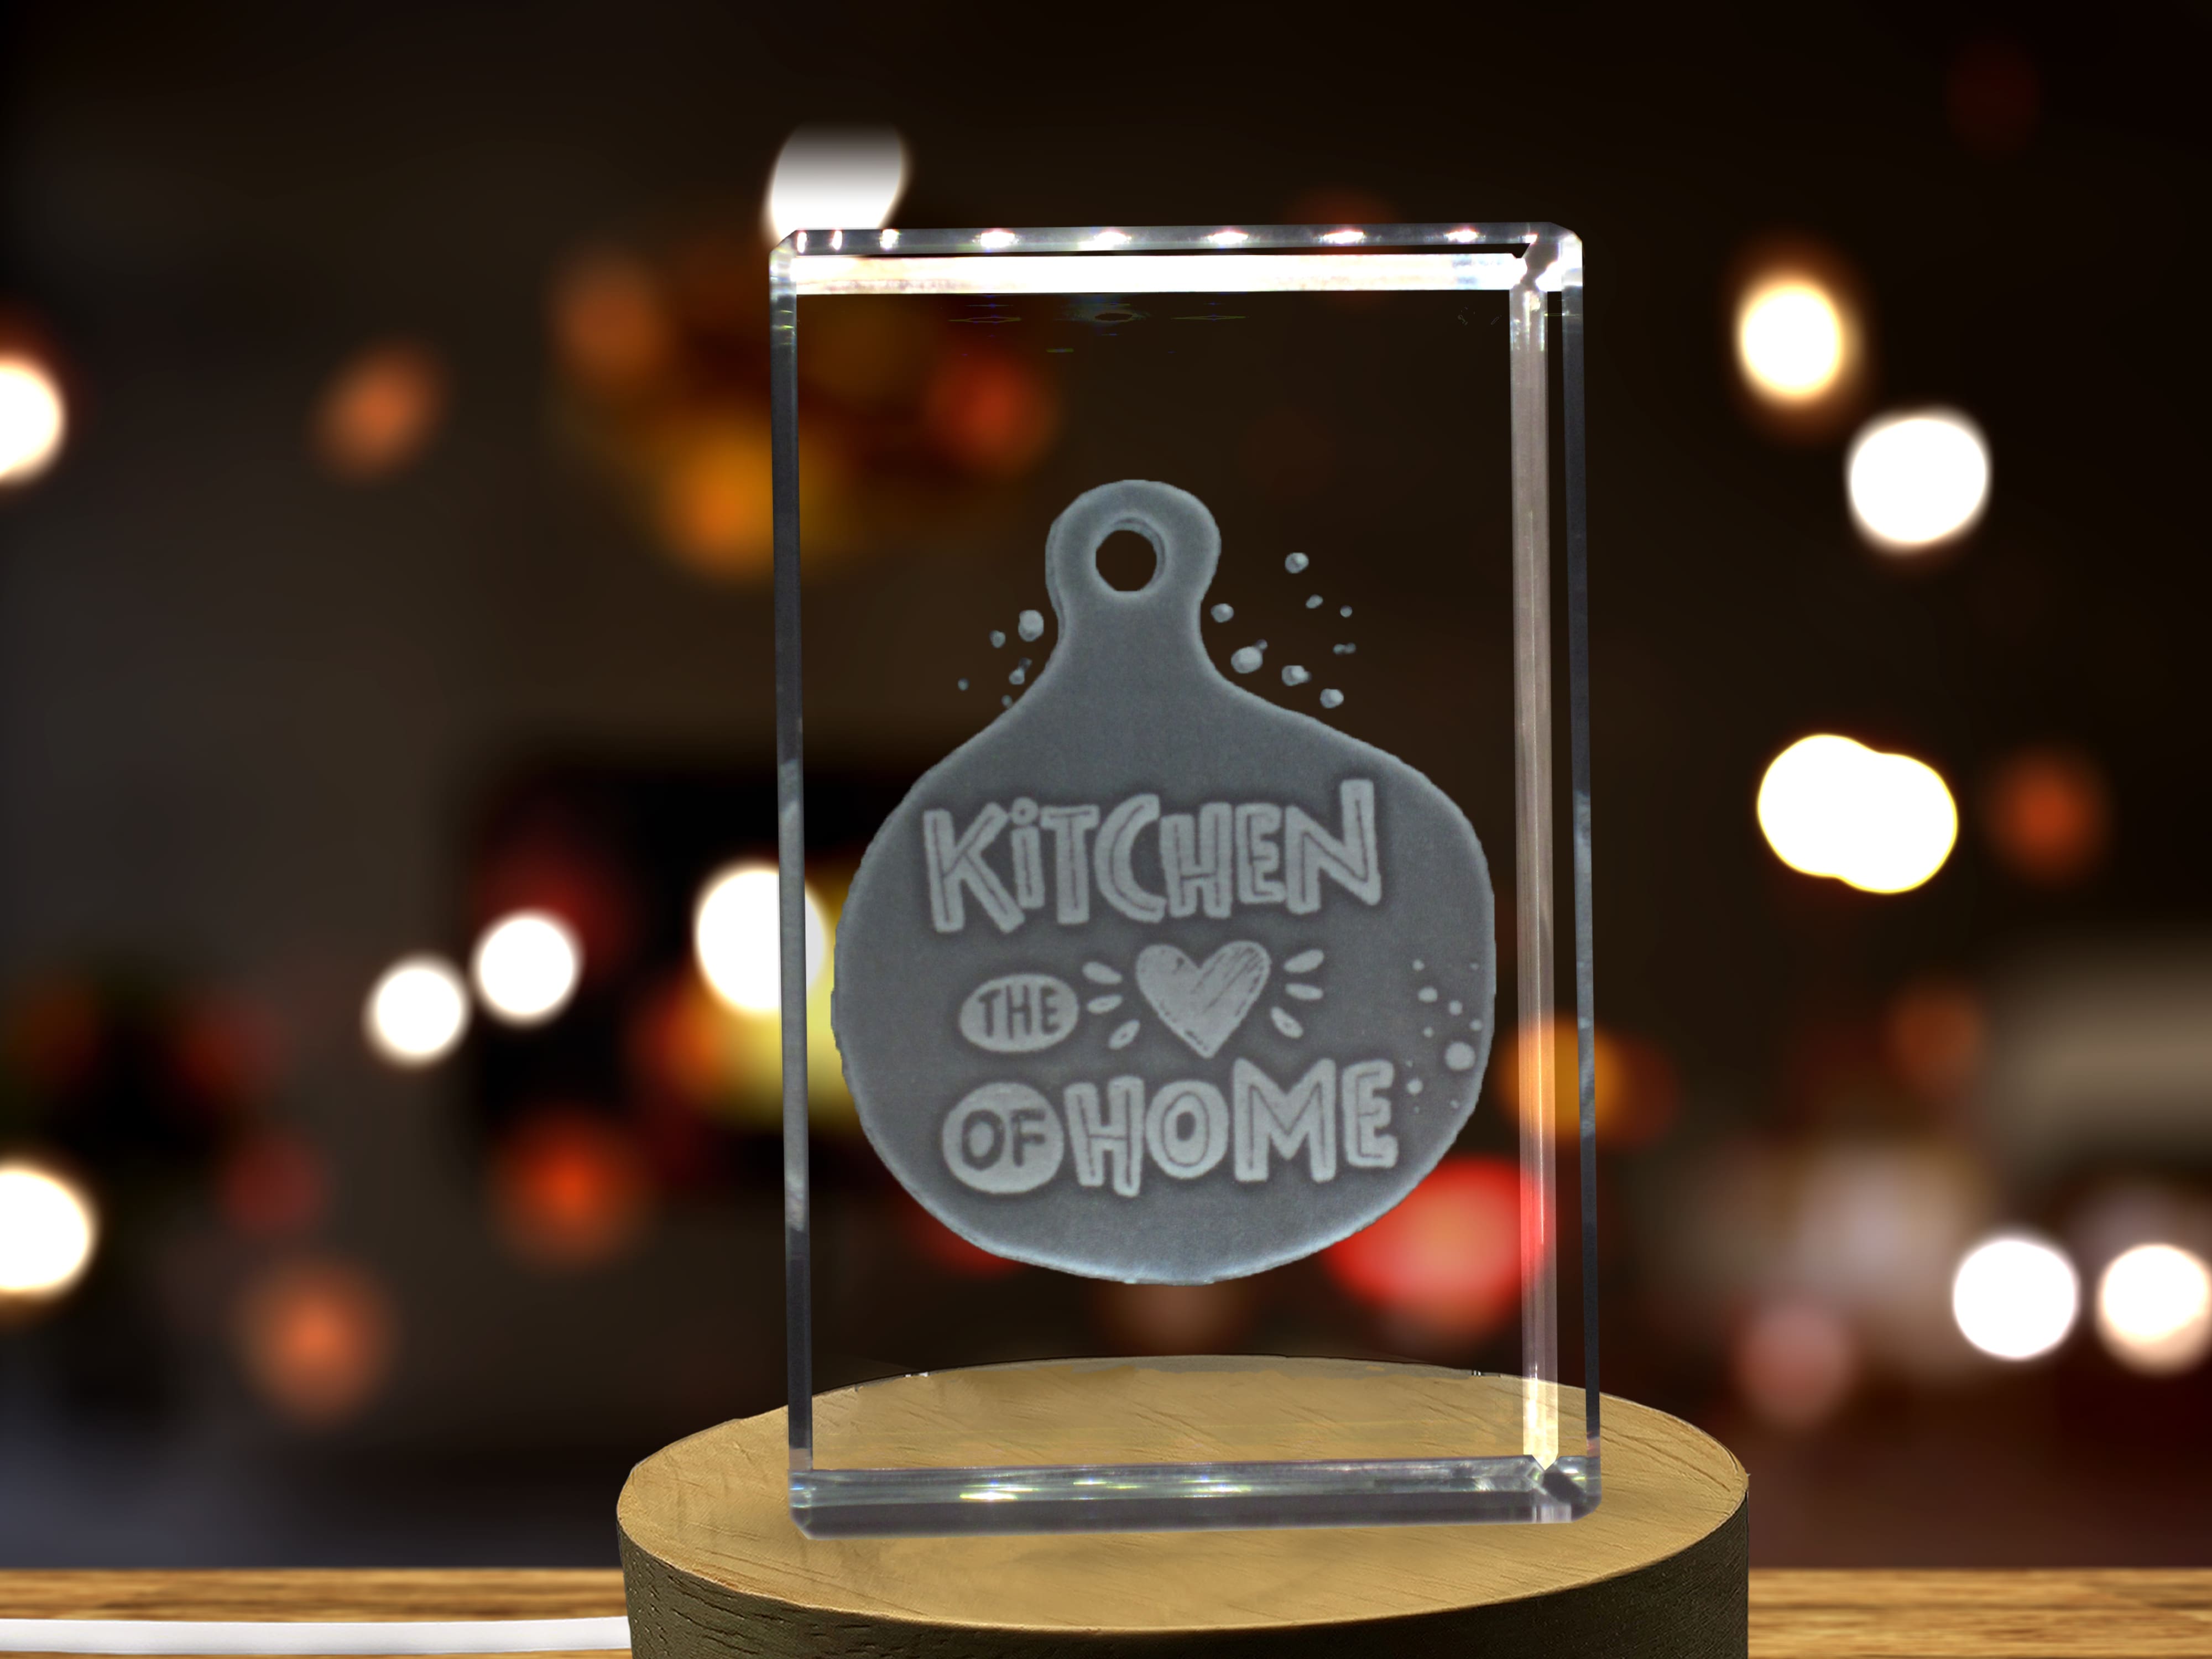 Kitchen is the Heart of the Home 3D Engraved Crystal 3D Engraved Crystal Keepsake/Gift/Decor/Collectible/Souvenir A&B Crystal Collection